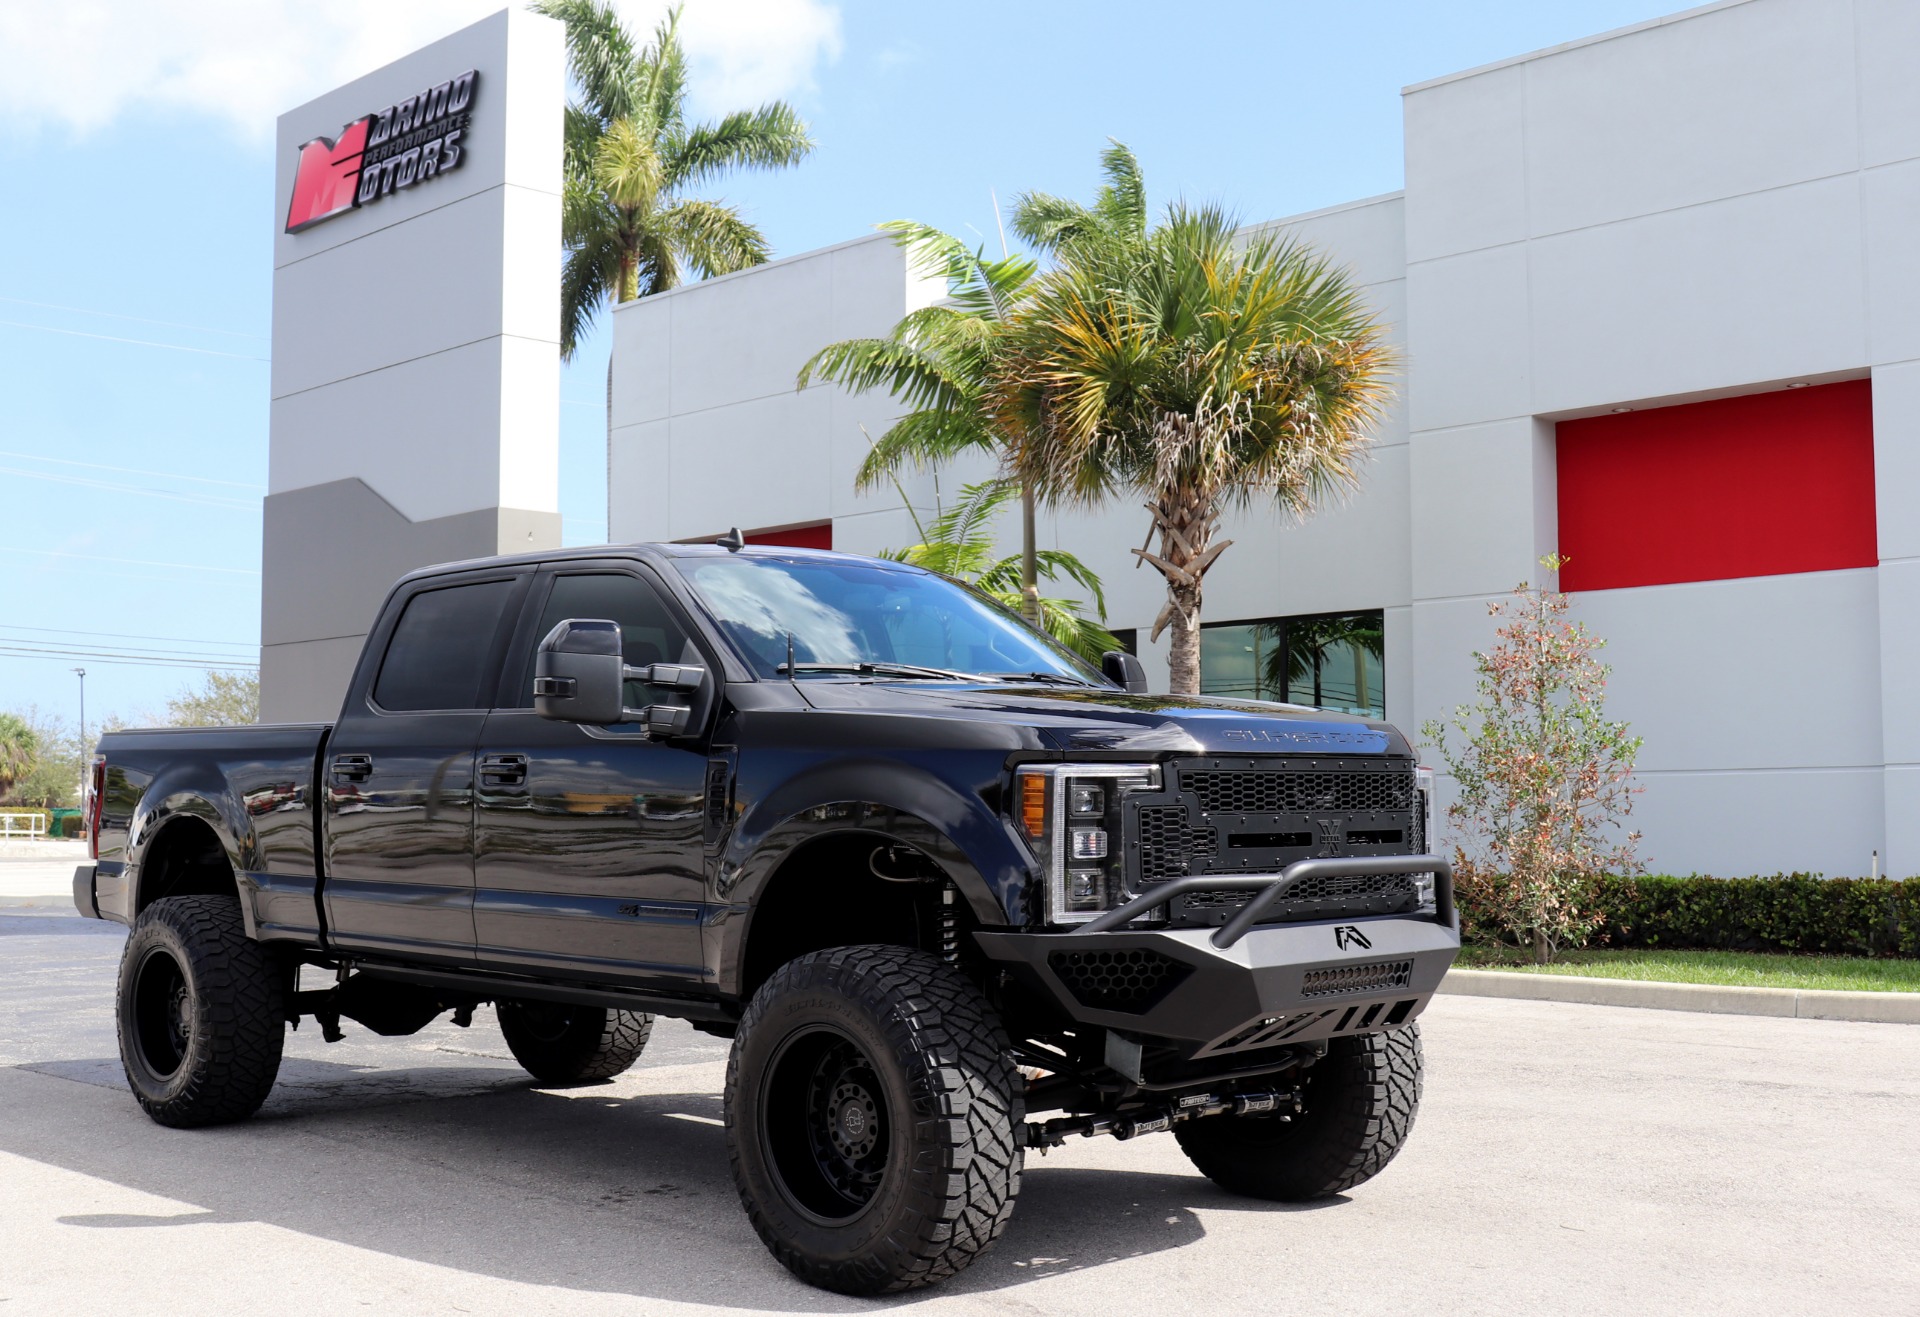 Used 2019 Ford F 250 Super Duty Lariat For Sale 74900 Marino